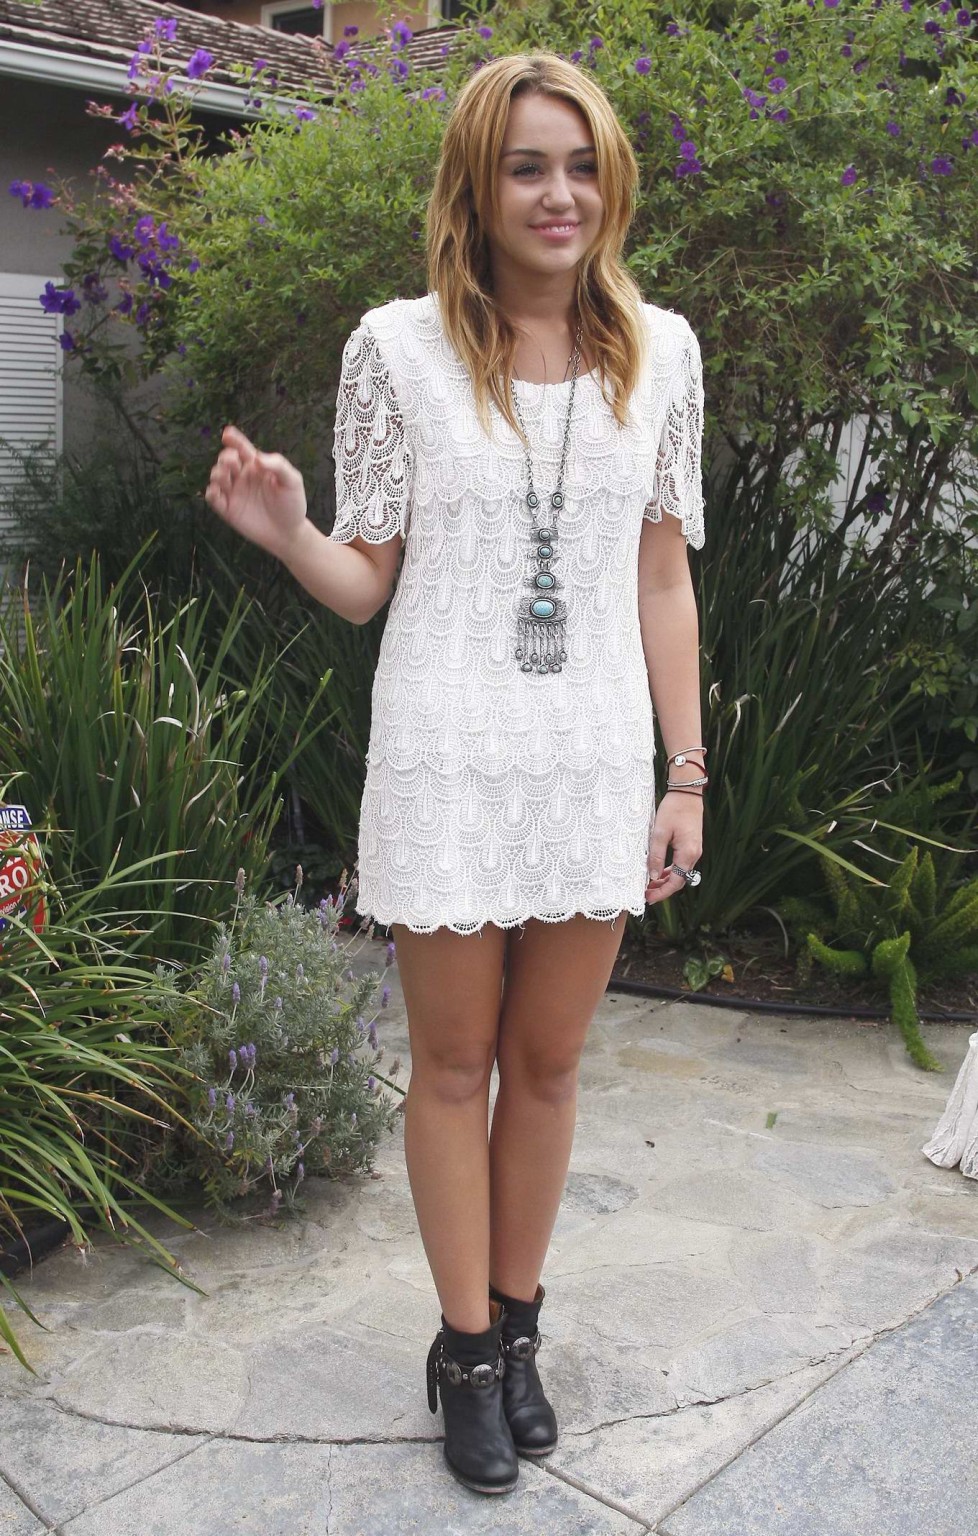 Miley Cyrus leggy wearing white mini dress at the house party #75289927